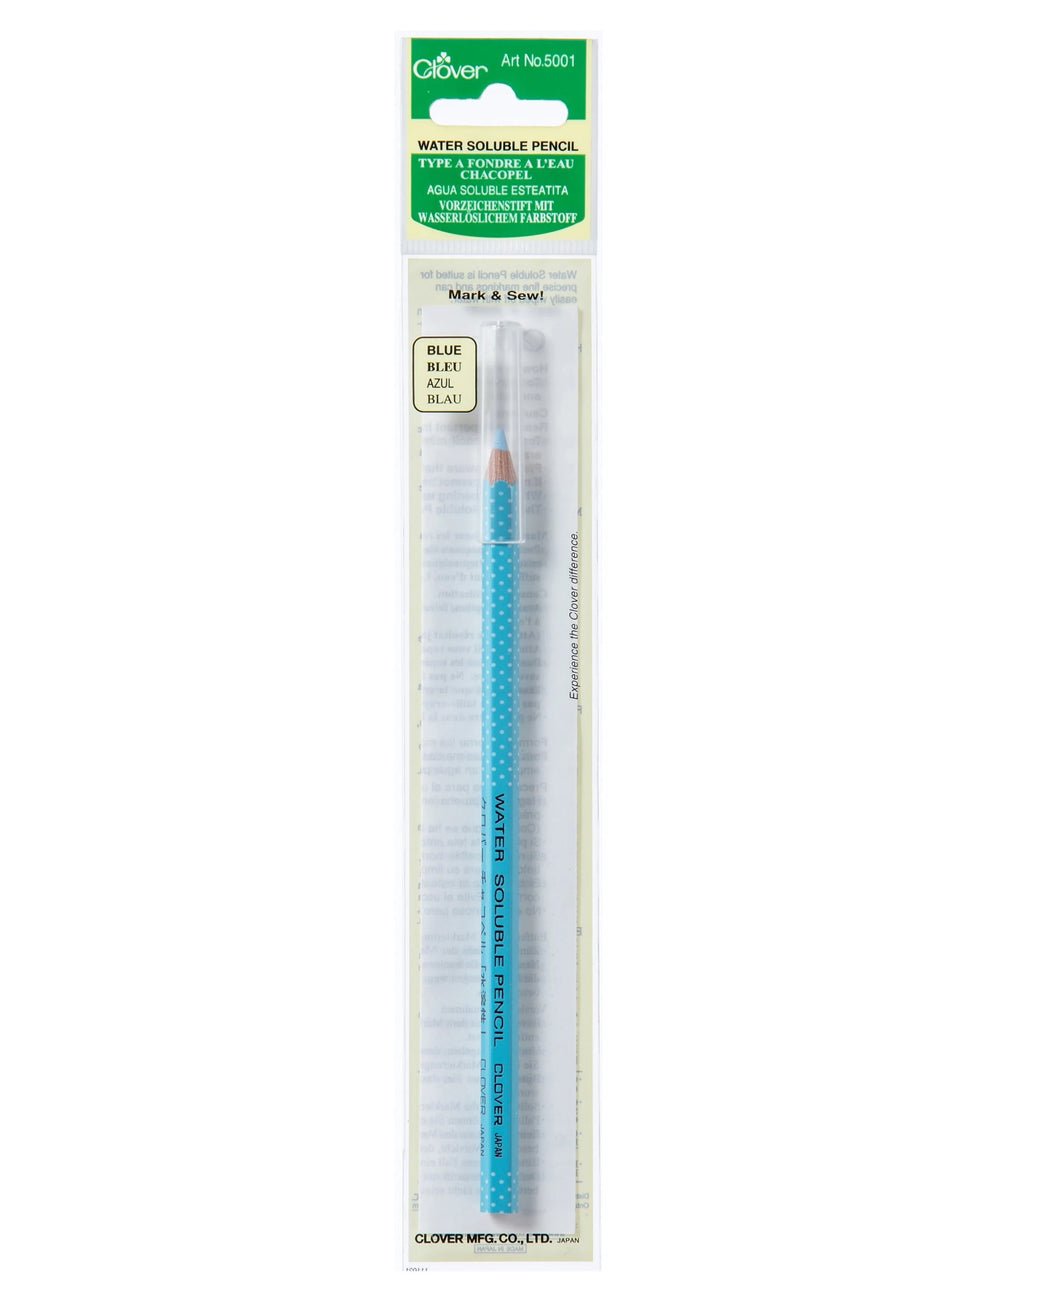 Water Soluble Pencil - Zipper and Thread